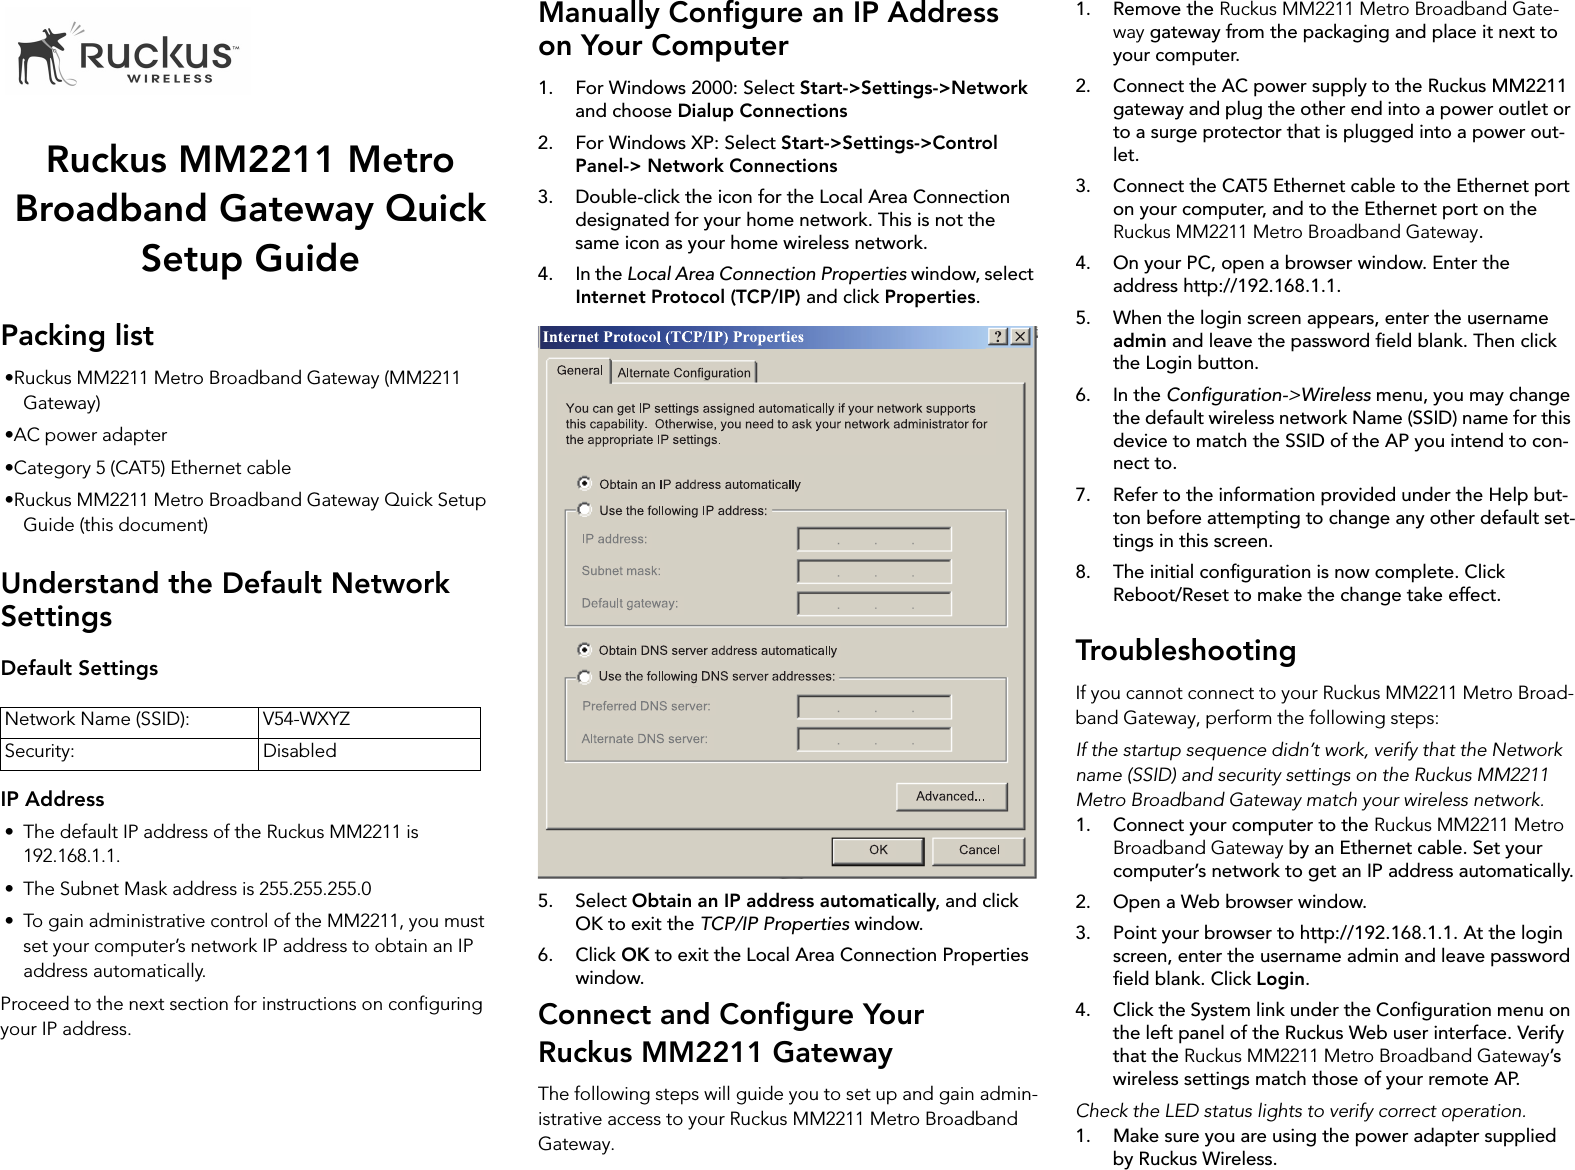 Ruckus MM2211 Metro Broadband Gateway Quick Setup GuidePacking list•Ruckus MM2211 Metro Broadband Gateway (MM2211 Gateway)•AC power adapter•Category 5 (CAT5) Ethernet cable•Ruckus MM2211 Metro Broadband Gateway Quick Setup Guide (this document)Understand the Default Network SettingsDefault SettingsIP Address• The default IP address of the Ruckus MM2211 is 192.168.1.1.• The Subnet Mask address is 255.255.255.0• To gain administrative control of the MM2211, you must set your computer’s network IP address to obtain an IP address automatically.Proceed to the next section for instructions on configuring your IP address.Manually Configure an IP Address on Your Computer1. For Windows 2000: Select Start-&gt;Settings-&gt;Network and choose Dialup Connections2. For Windows XP: Select Start-&gt;Settings-&gt;Control Panel-&gt; Network Connections3. Double-click the icon for the Local Area Connection designated for your home network. This is not the same icon as your home wireless network.4. In the Local Area Connection Properties window, select Internet Protocol (TCP/IP) and click Properties.5. Select Obtain an IP address automatically, and click OK to exit the TCP/IP Properties window.6. Click OK to exit the Local Area Connection Properties window.Connect and Configure Your Ruckus MM2211 GatewayThe following steps will guide you to set up and gain admin-istrative access to your Ruckus MM2211 Metro Broadband Gateway.1. Remove the Ruckus MM2211 Metro Broadband Gate-way gateway from the packaging and place it next to your computer.2. Connect the AC power supply to the Ruckus MM2211 gateway and plug the other end into a power outlet or to a surge protector that is plugged into a power out-let.3. Connect the CAT5 Ethernet cable to the Ethernet port on your computer, and to the Ethernet port on the Ruckus MM2211 Metro Broadband Gateway.4. On your PC, open a browser window. Enter the address http://192.168.1.1.5. When the login screen appears, enter the username admin and leave the password field blank. Then click the Login button.6. In the Configuration-&gt;Wireless menu, you may change the default wireless network Name (SSID) name for this device to match the SSID of the AP you intend to con-nect to.7. Refer to the information provided under the Help but-ton before attempting to change any other default set-tings in this screen. 8. The initial configuration is now complete. Click Reboot/Reset to make the change take effect.TroubleshootingIf you cannot connect to your Ruckus MM2211 Metro Broad-band Gateway, perform the following steps:If the startup sequence didn’t work, verify that the Network name (SSID) and security settings on the Ruckus MM2211 Metro Broadband Gateway match your wireless network.1. Connect your computer to the Ruckus MM2211 Metro Broadband Gateway by an Ethernet cable. Set your computer’s network to get an IP address automatically.2. Open a Web browser window.3. Point your browser to http://192.168.1.1. At the login screen, enter the username admin and leave password field blank. Click Login.4. Click the System link under the Configuration menu on the left panel of the Ruckus Web user interface. Verify that the Ruckus MM2211 Metro Broadband Gateway’s wireless settings match those of your remote AP.Check the LED status lights to verify correct operation.1. Make sure you are using the power adapter supplied by Ruckus Wireless.Network Name (SSID): V54-WXYZSecurity: Disabled